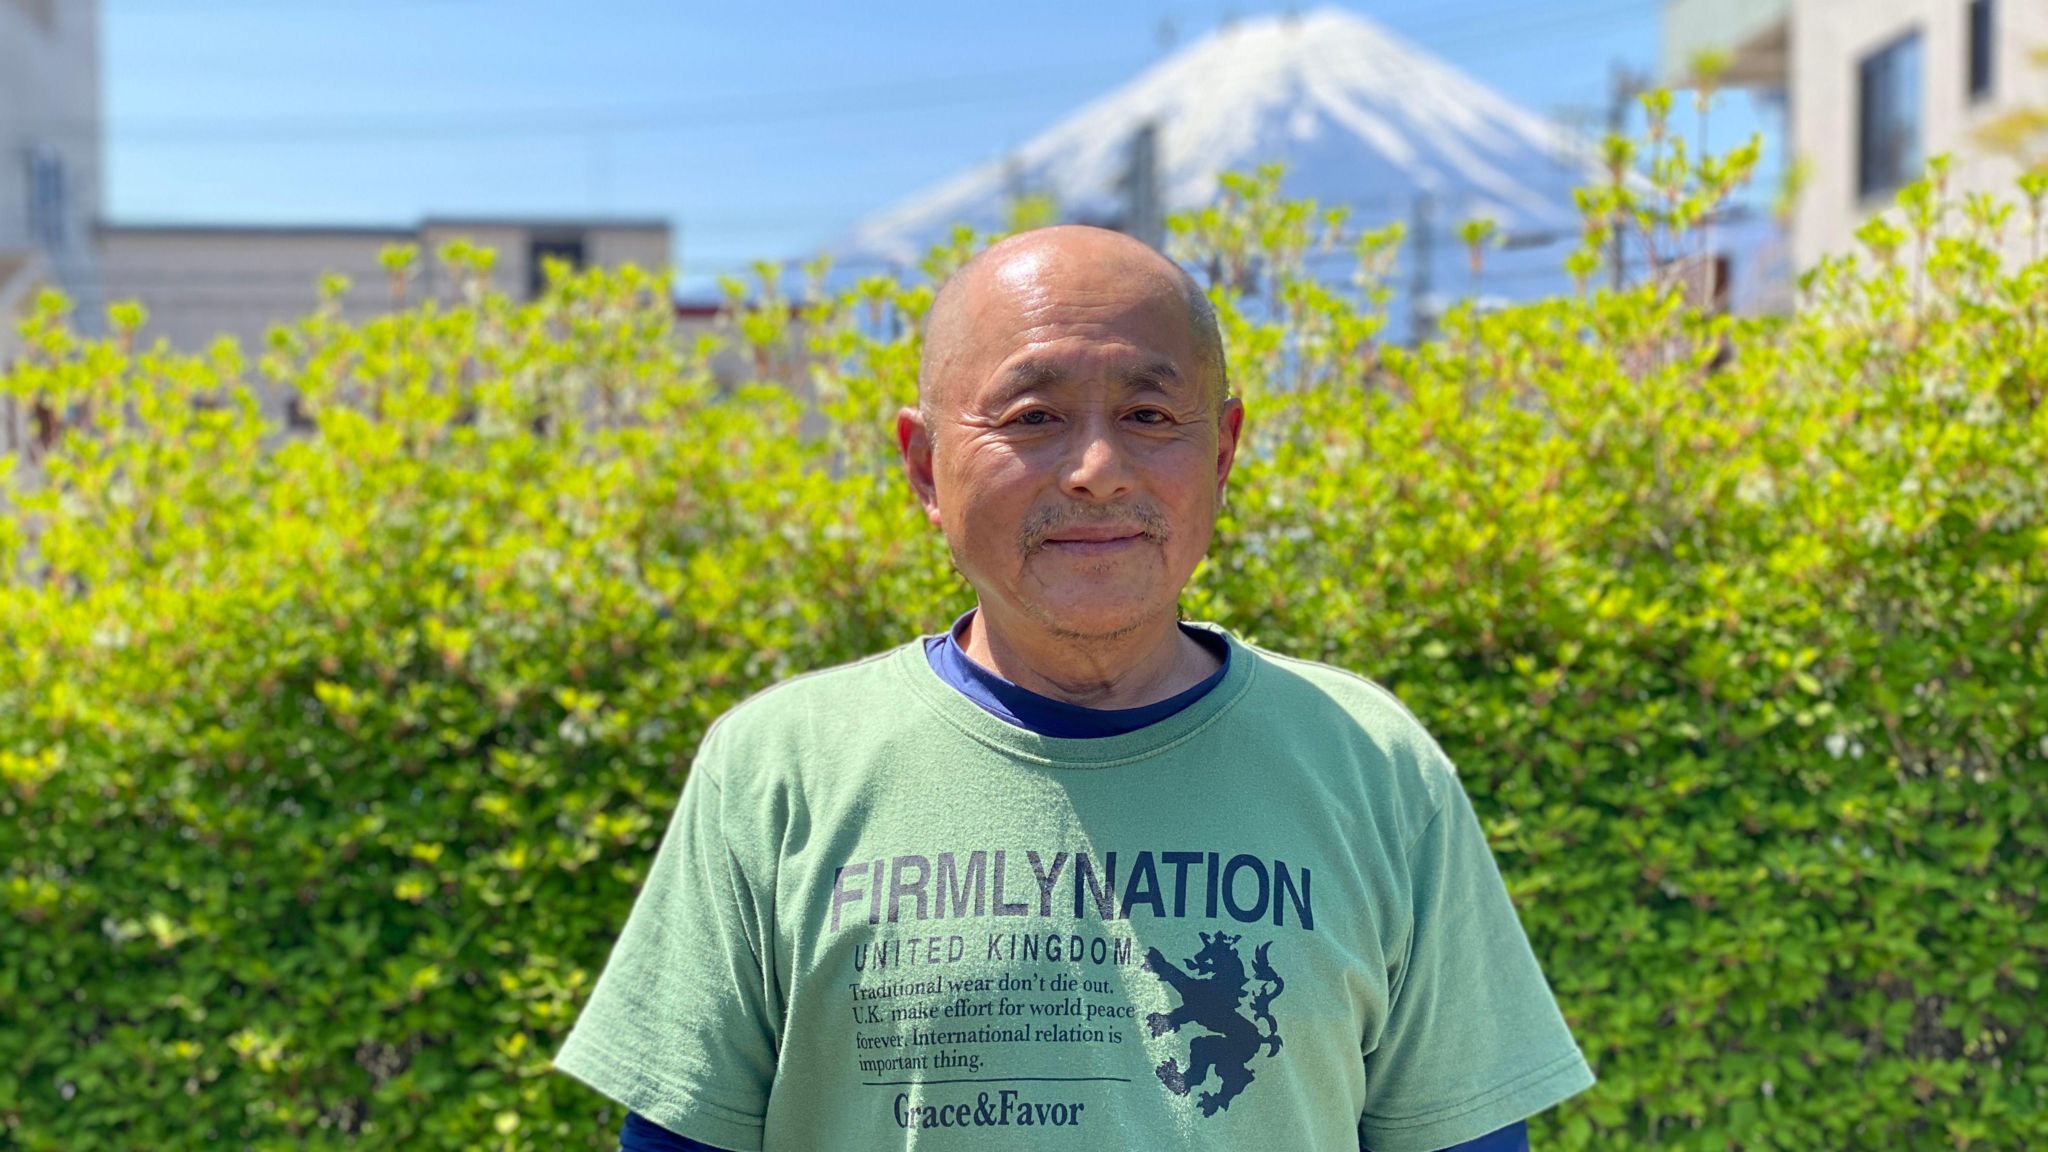 Kazuhiko Iwama, 65-year-old local, stands in front of camera